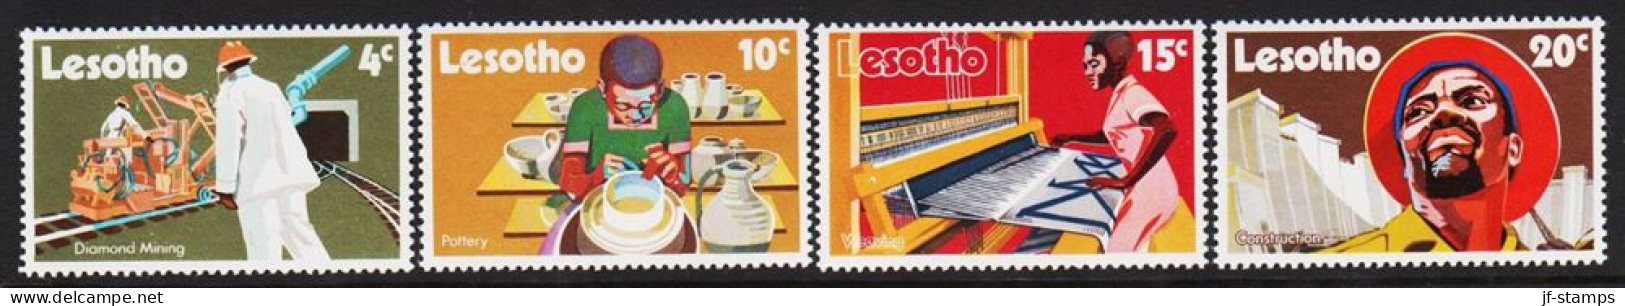 1971. LESOTHO. Development, Complete Set With 4 Stamps. Never Hinged.  (Michel 116-119) - JF544643 - Lesotho (1966-...)